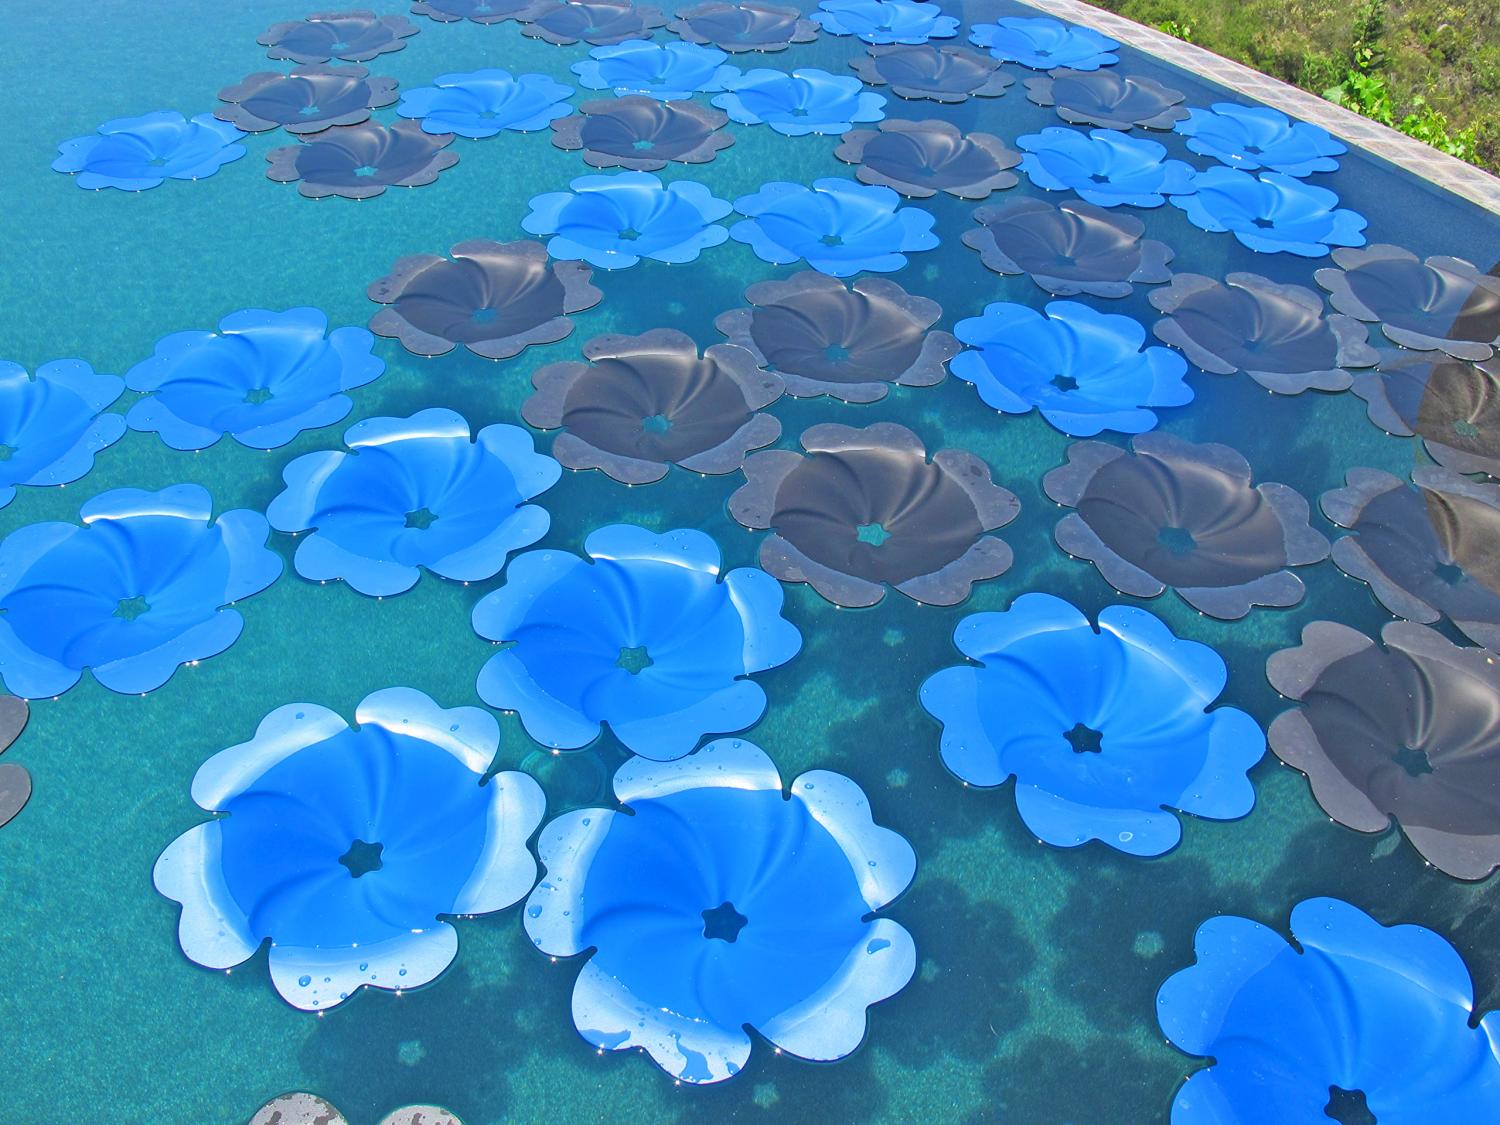 Solar pool flowers heat your pool by absorbing sunlight